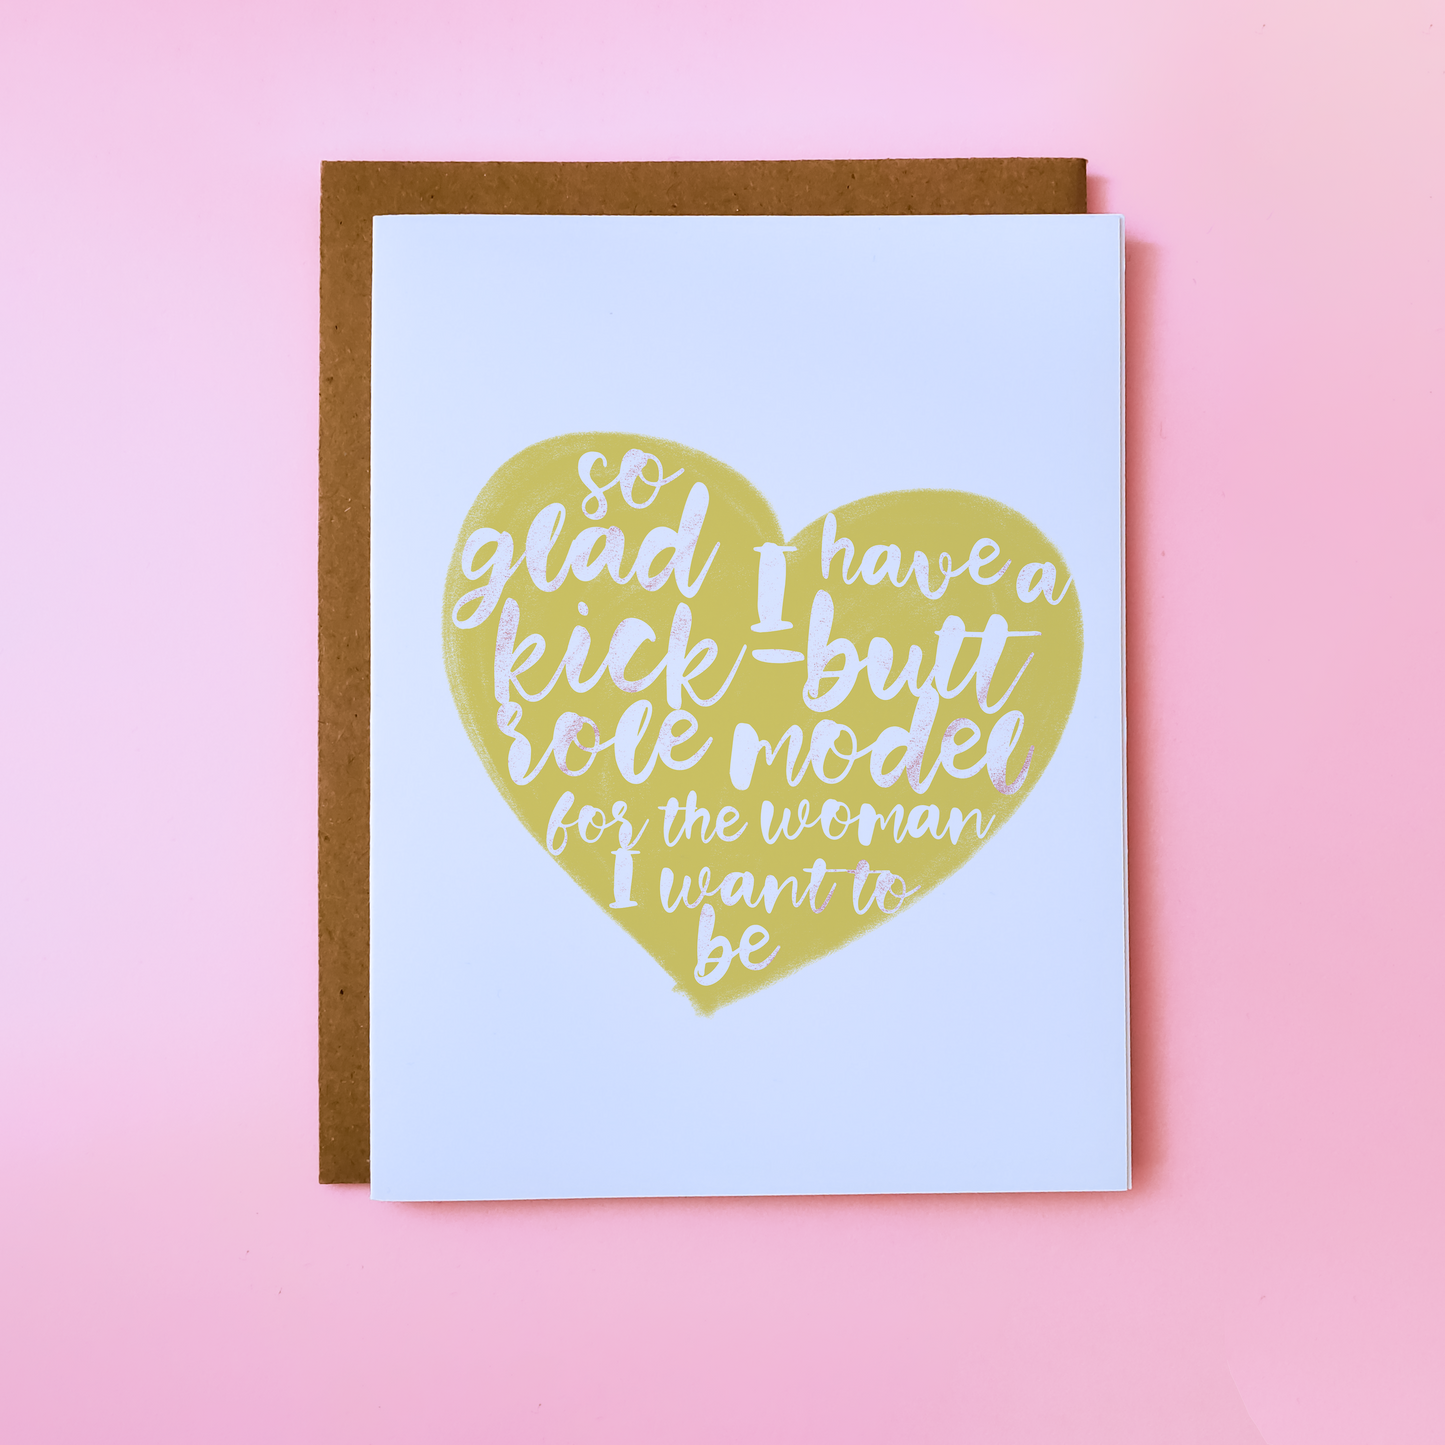 A LGBTQ Parent Card with a kraft envelope set on a pink background. This inclusive parent Day Card features a yellow heart with text that reads 'So glad I have a kick-butt role model for the woman I want to be'.